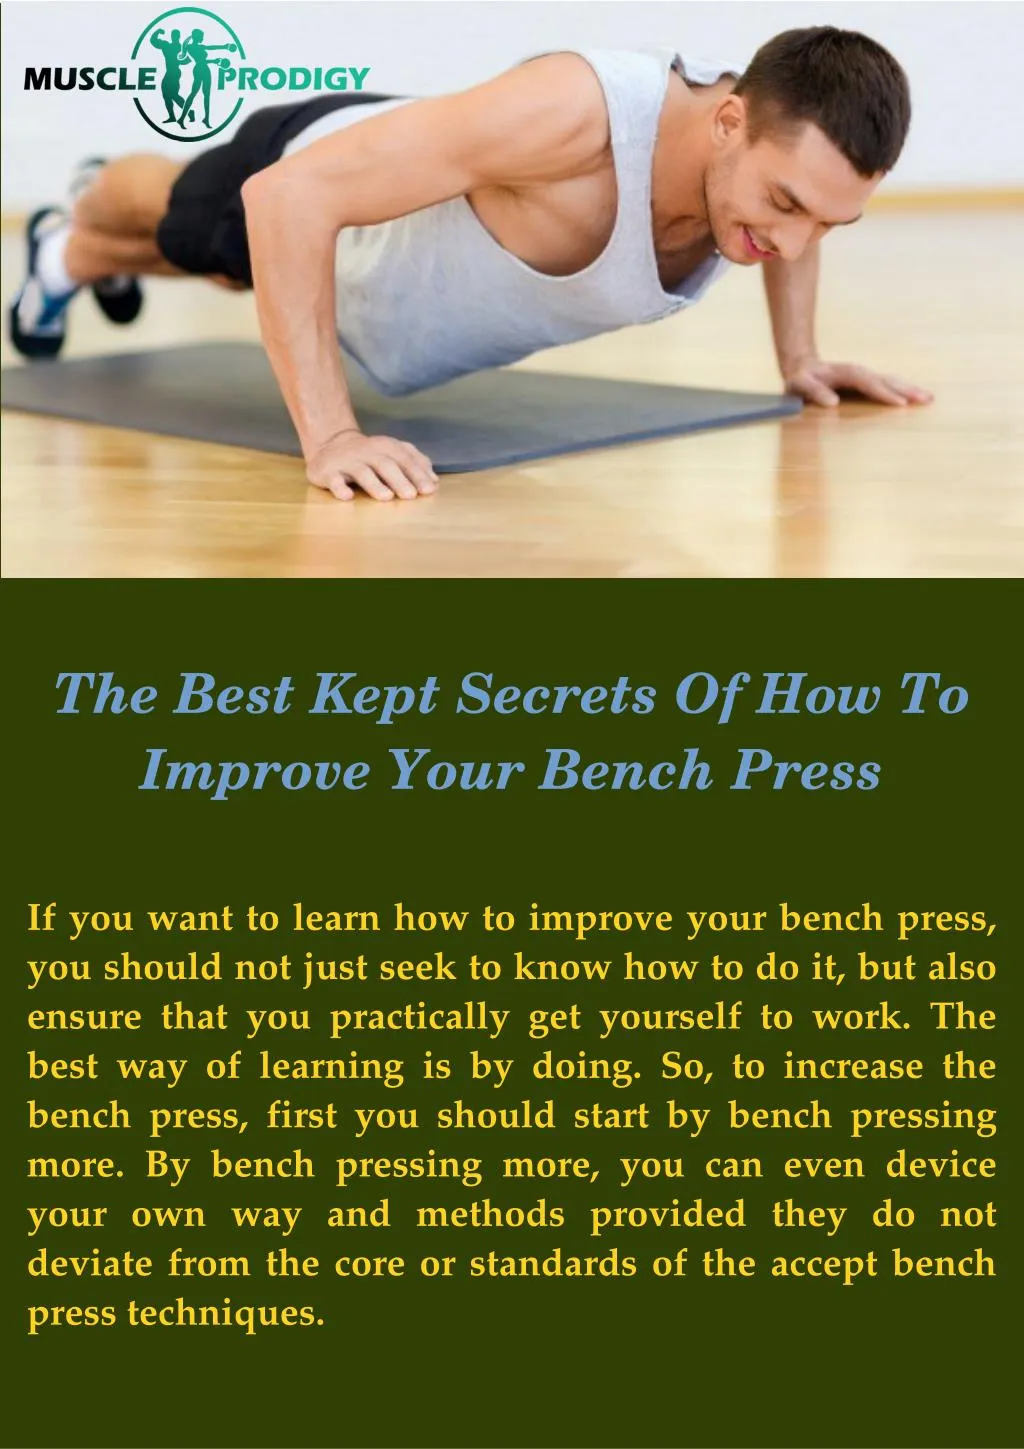 the best kept secrets of how to improve your